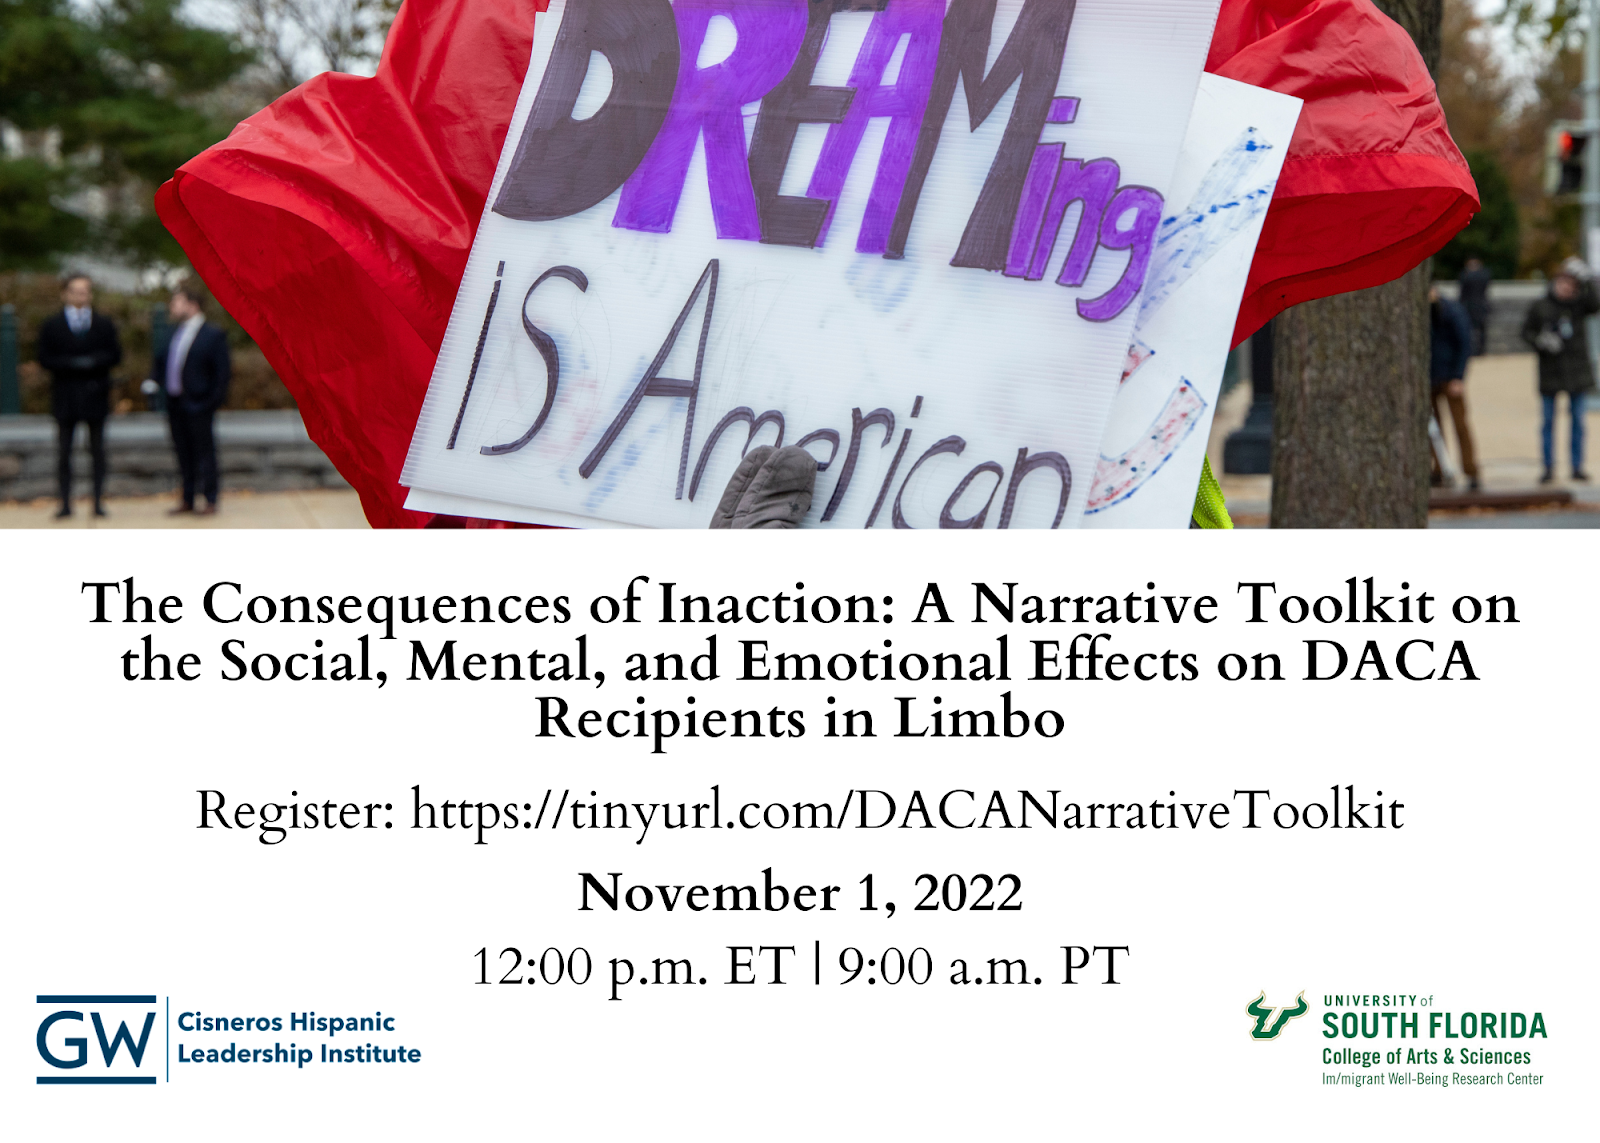 The Consequences of Inaction: A Narrative Toolkit on the Social, Mental, and Emotional Effects of DACA on Recipients in Limbo